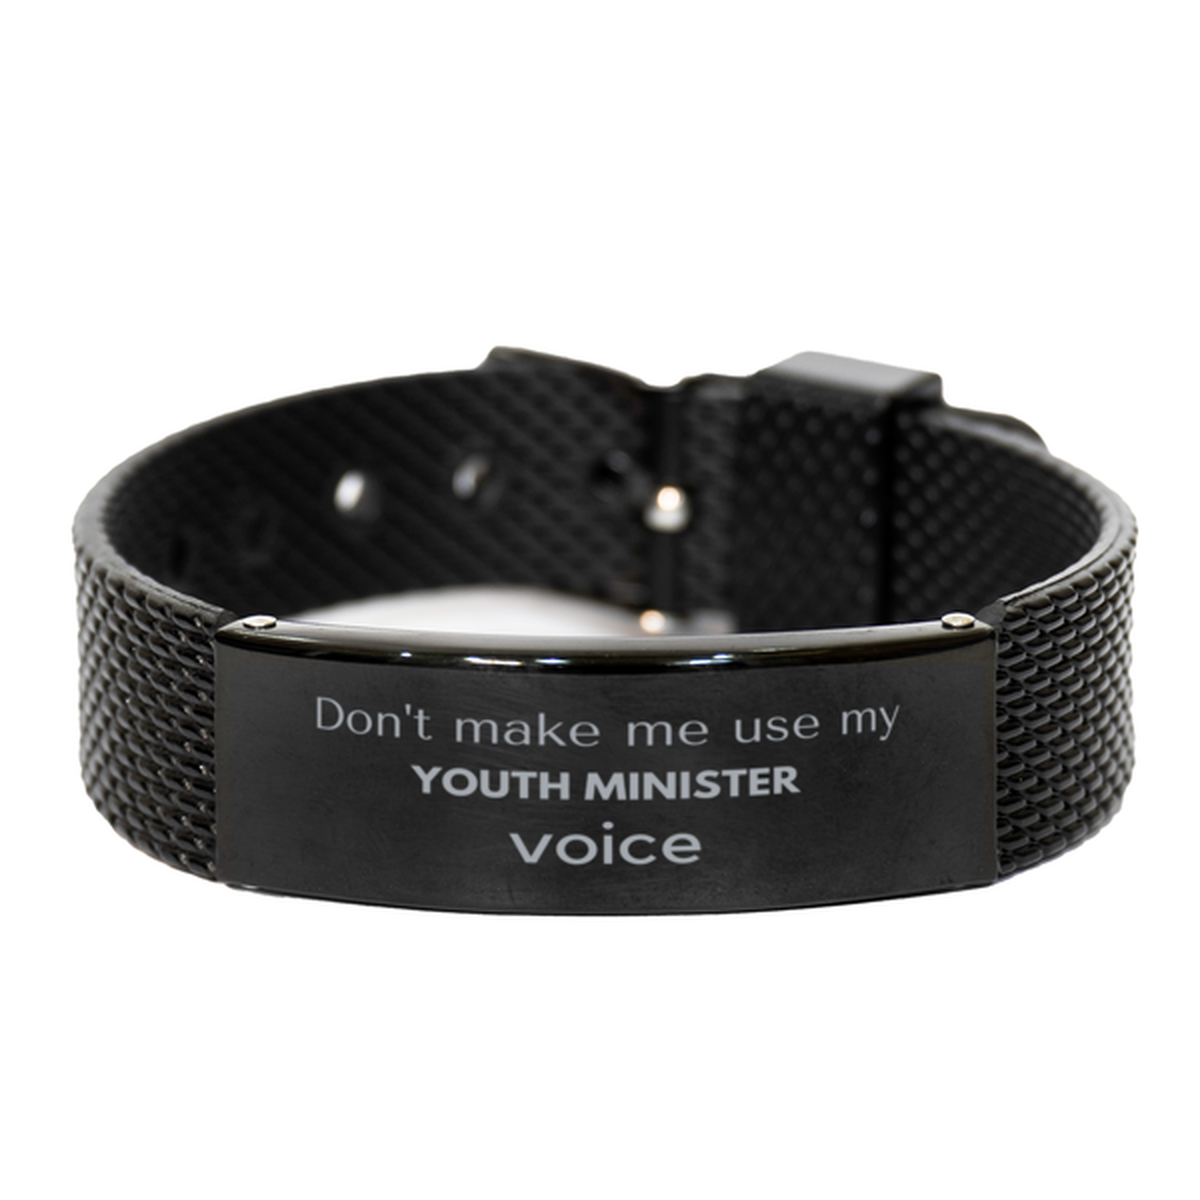 Don't make me use my Youth Minister voice, Sarcasm Youth Minister Gifts, Christmas Youth Minister Black Shark Mesh Bracelet Birthday Unique Gifts For Youth Minister Coworkers, Men, Women, Colleague, Friends